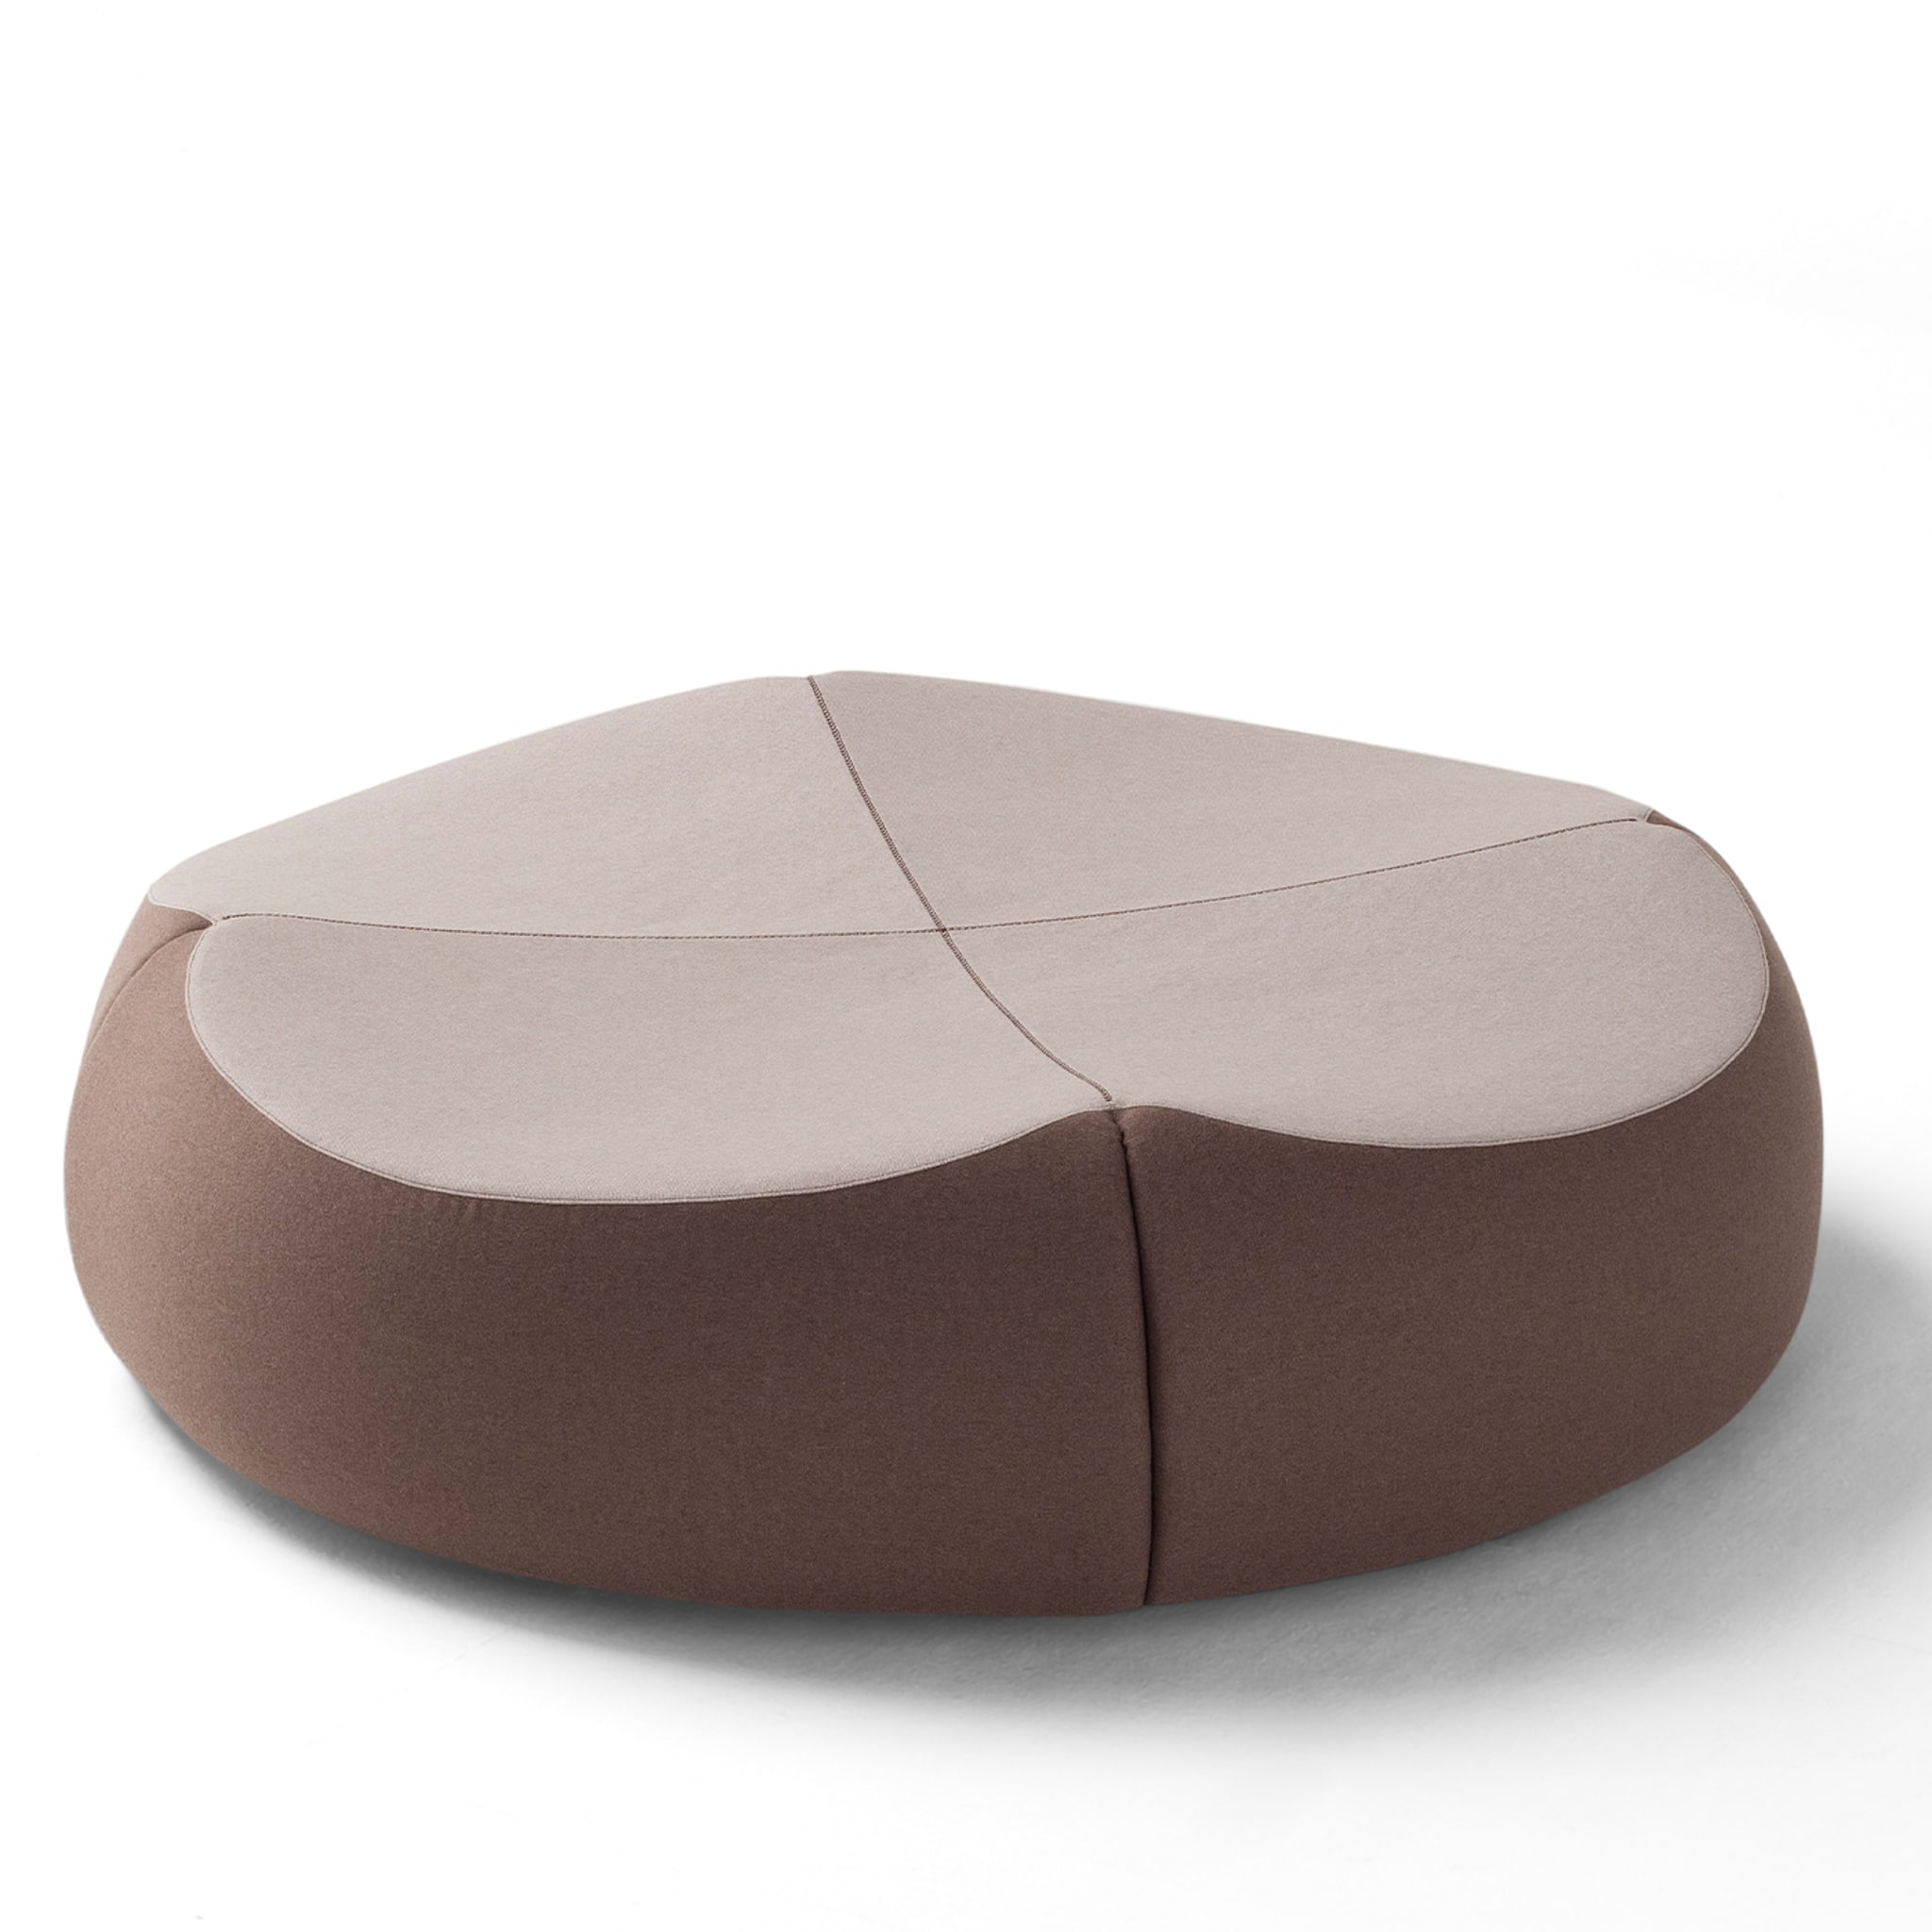 Panis Large Pouf by Anton Cristell and Emanuel Gargano - Alternative view 1